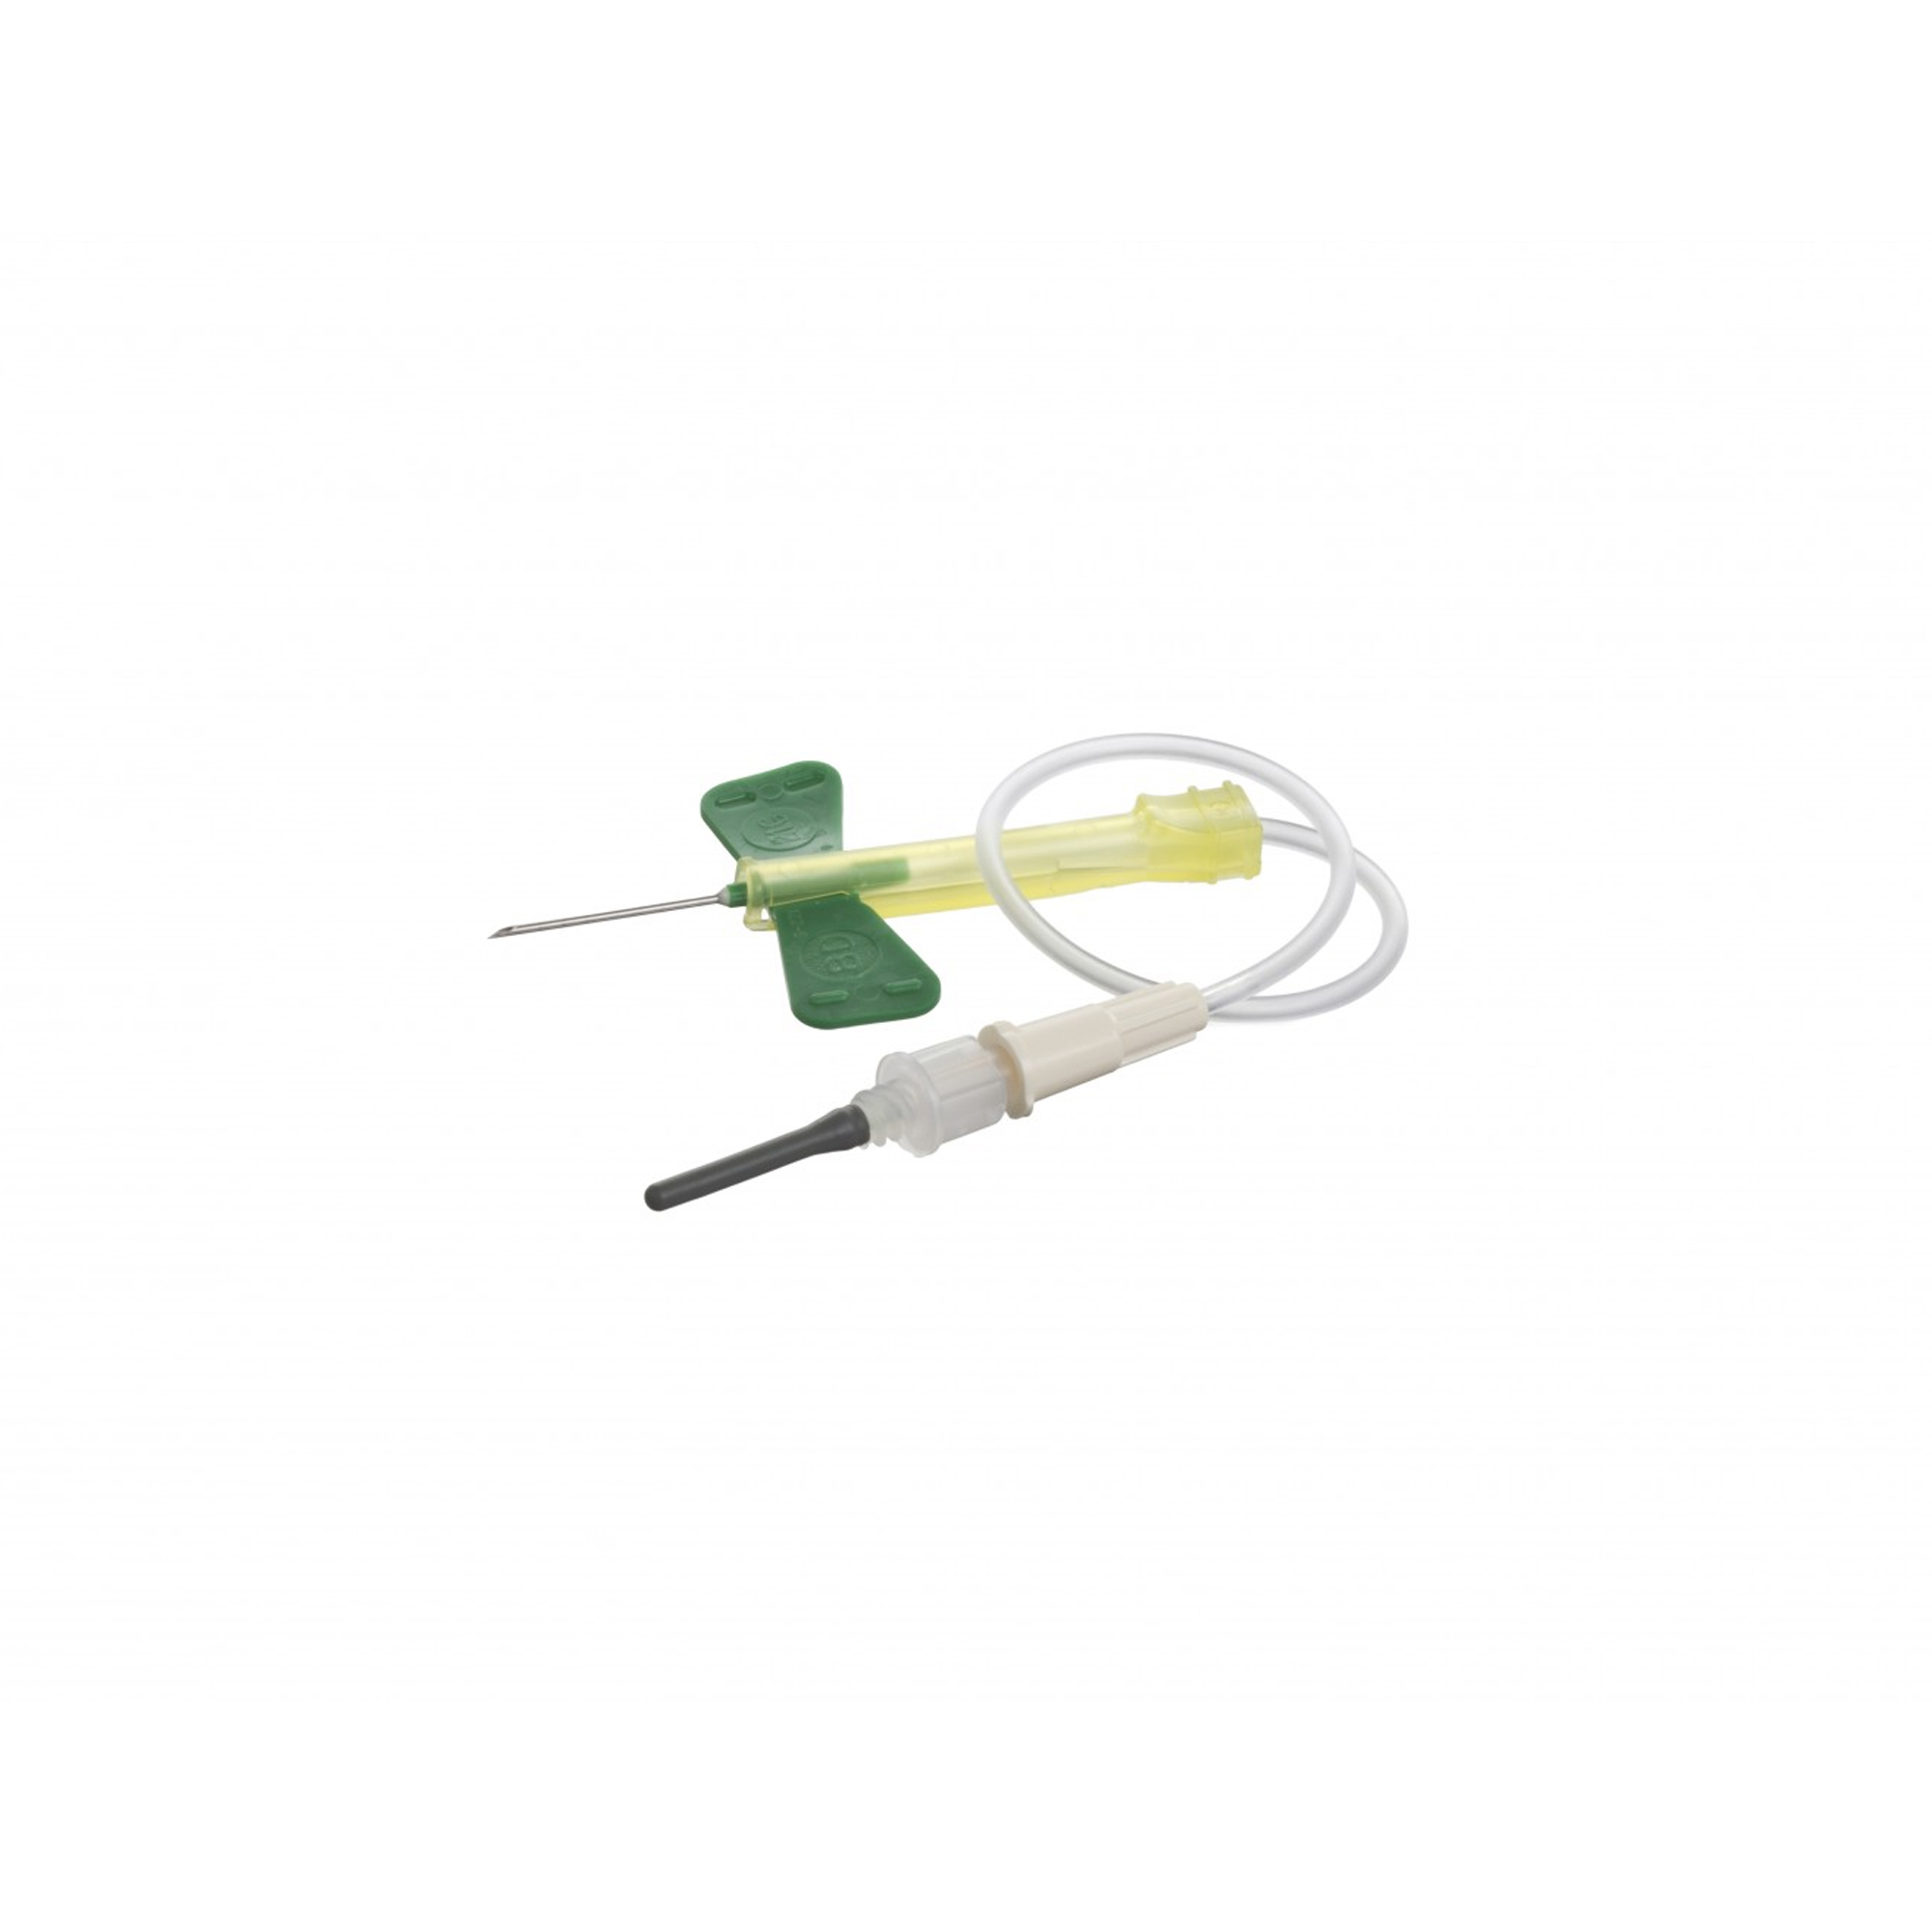 Vacuette Safety 23G Blood Collection Set Luer Adaptor With Coulture Holder - 19Cm Tube - Case Of 25